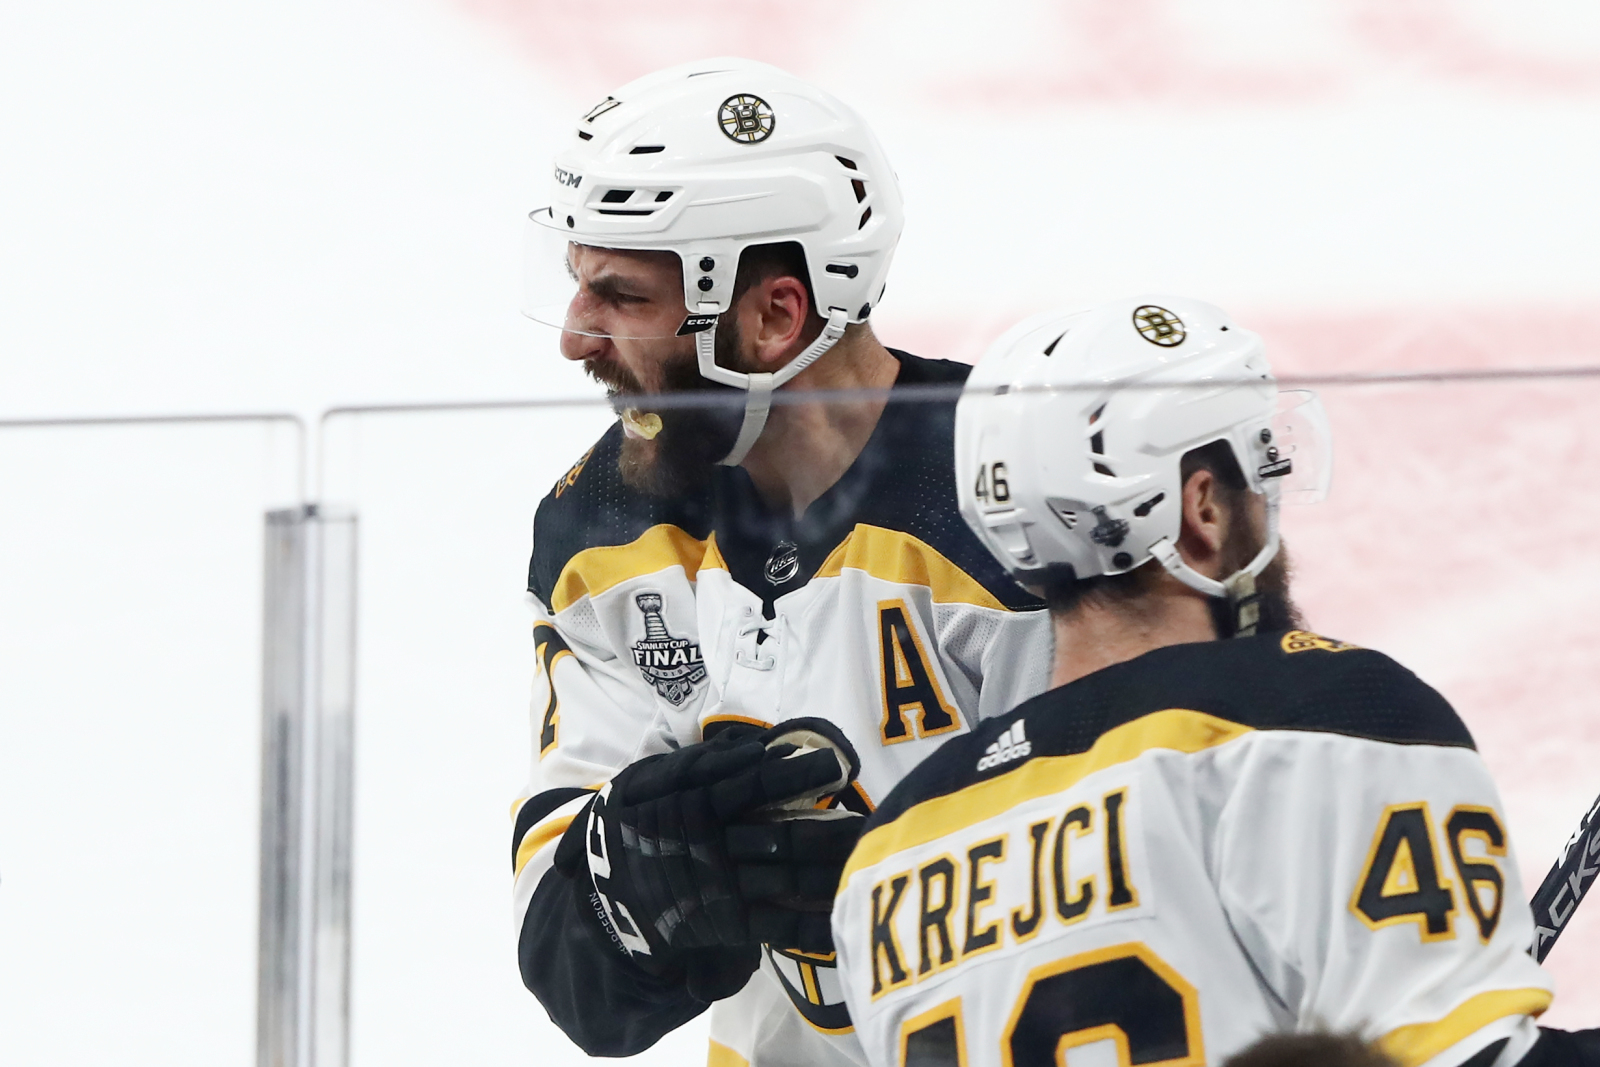 Get Fired Up For The Playoffs With Patrice Bergeron's Players